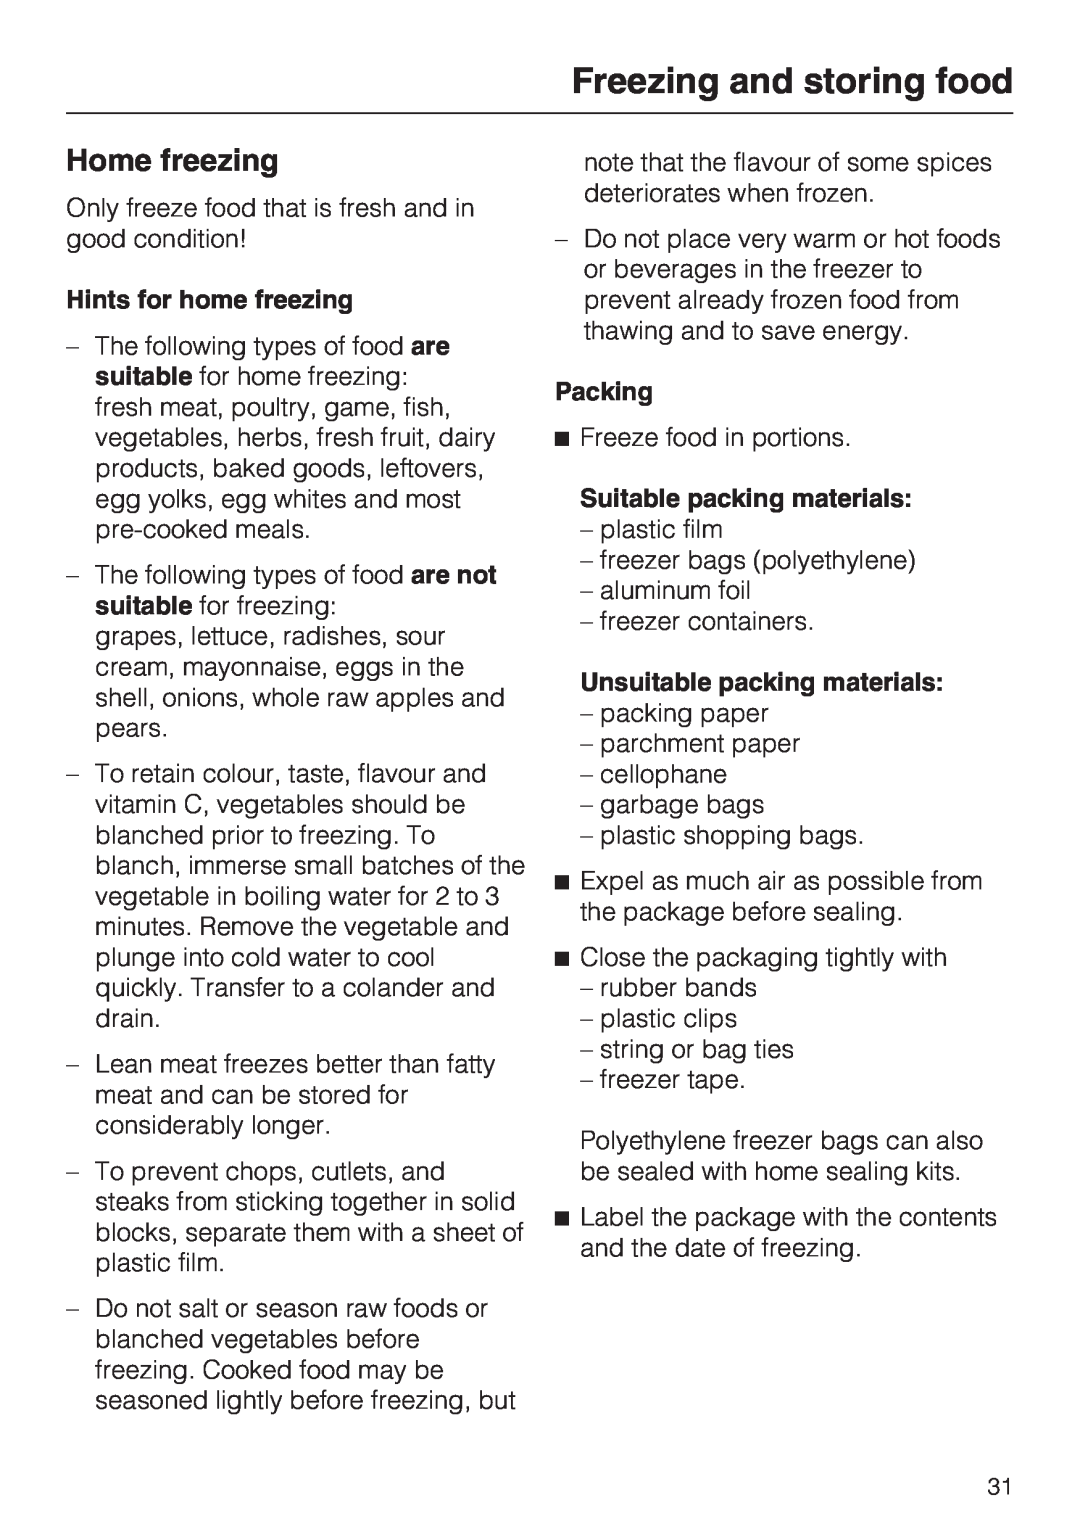 Miele KFN 14943 SD ED installation instructions Home freezing, Hints for home freezing, Packing, Suitable packing materials 